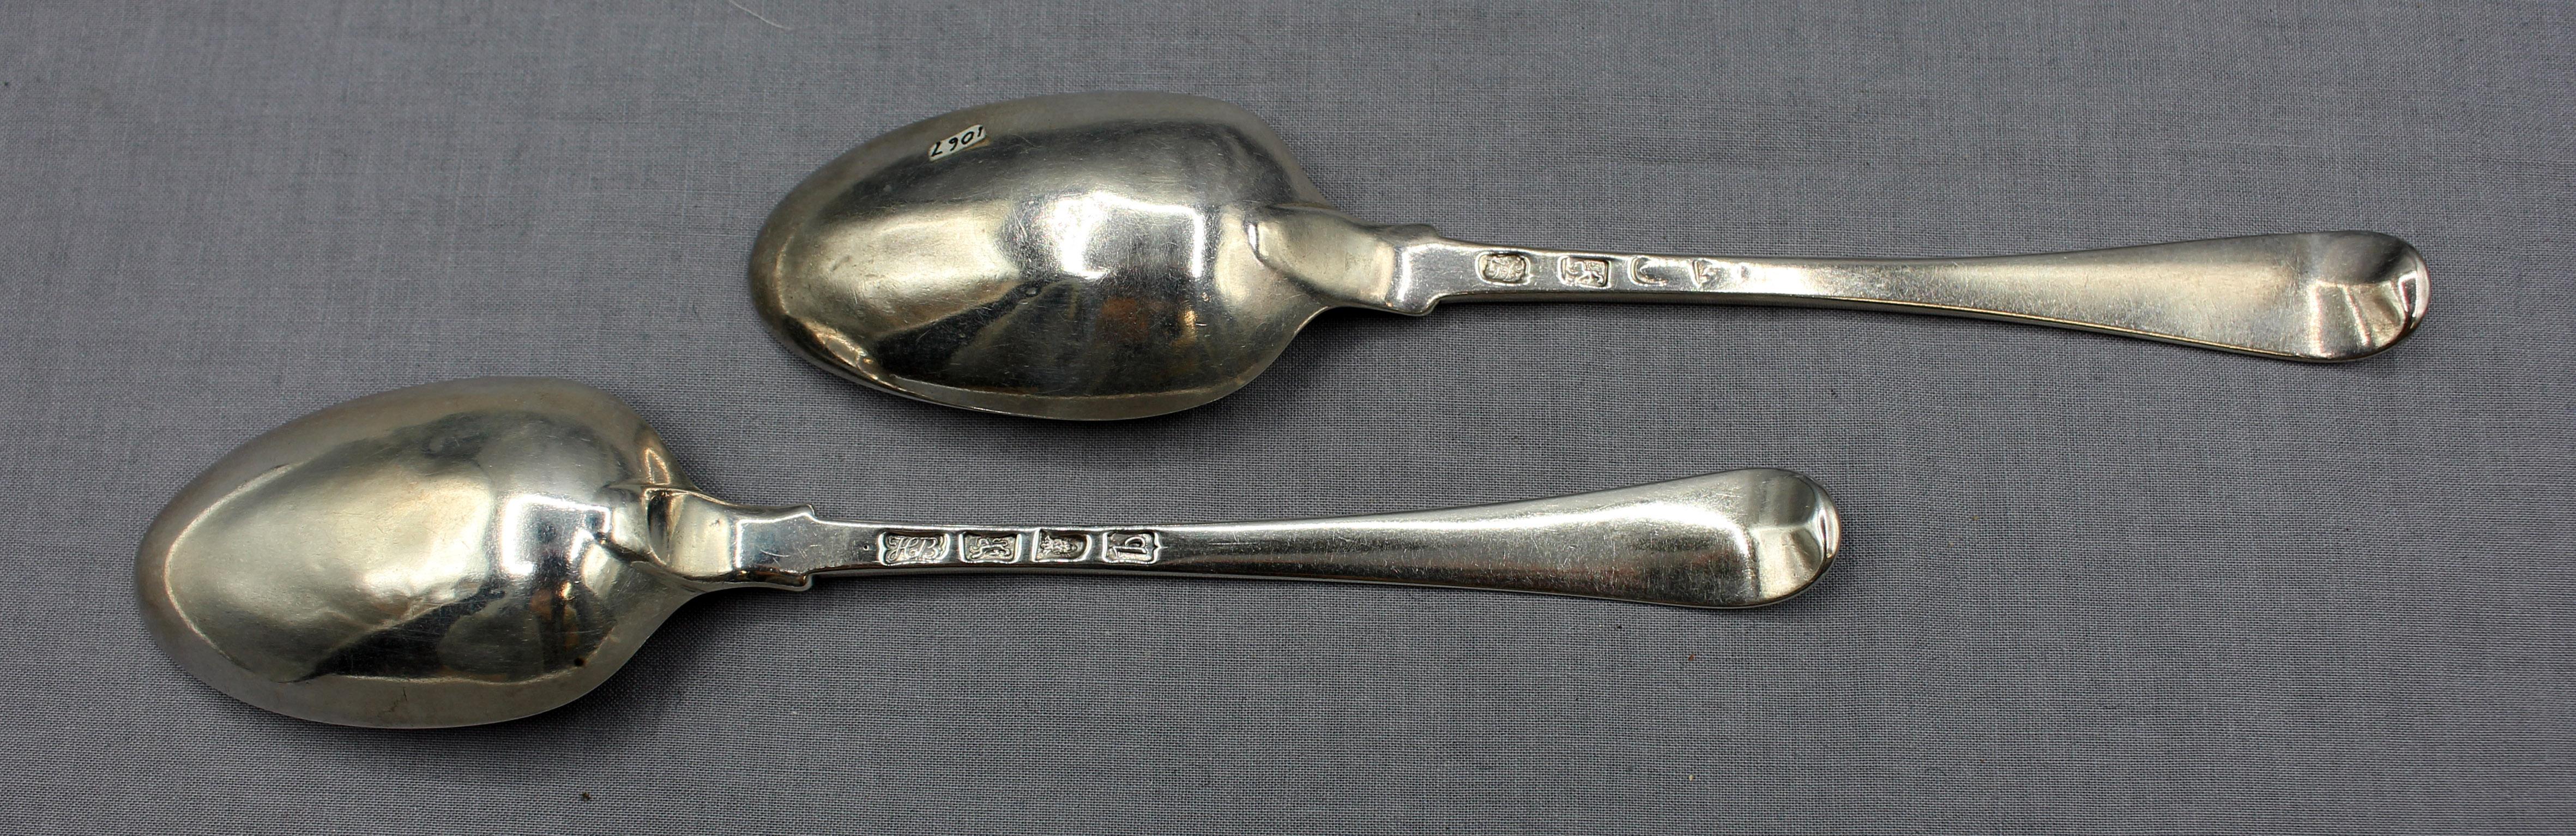 Matched pair of sterling silver tablespoons by Lampfert & Bateman, London, 1740s & 1777. Crested (lion's head erased, assoc. with multiple families); rubbed date mark for the one by John Lampfert. The other by Hester Bateman, 1777, this one is